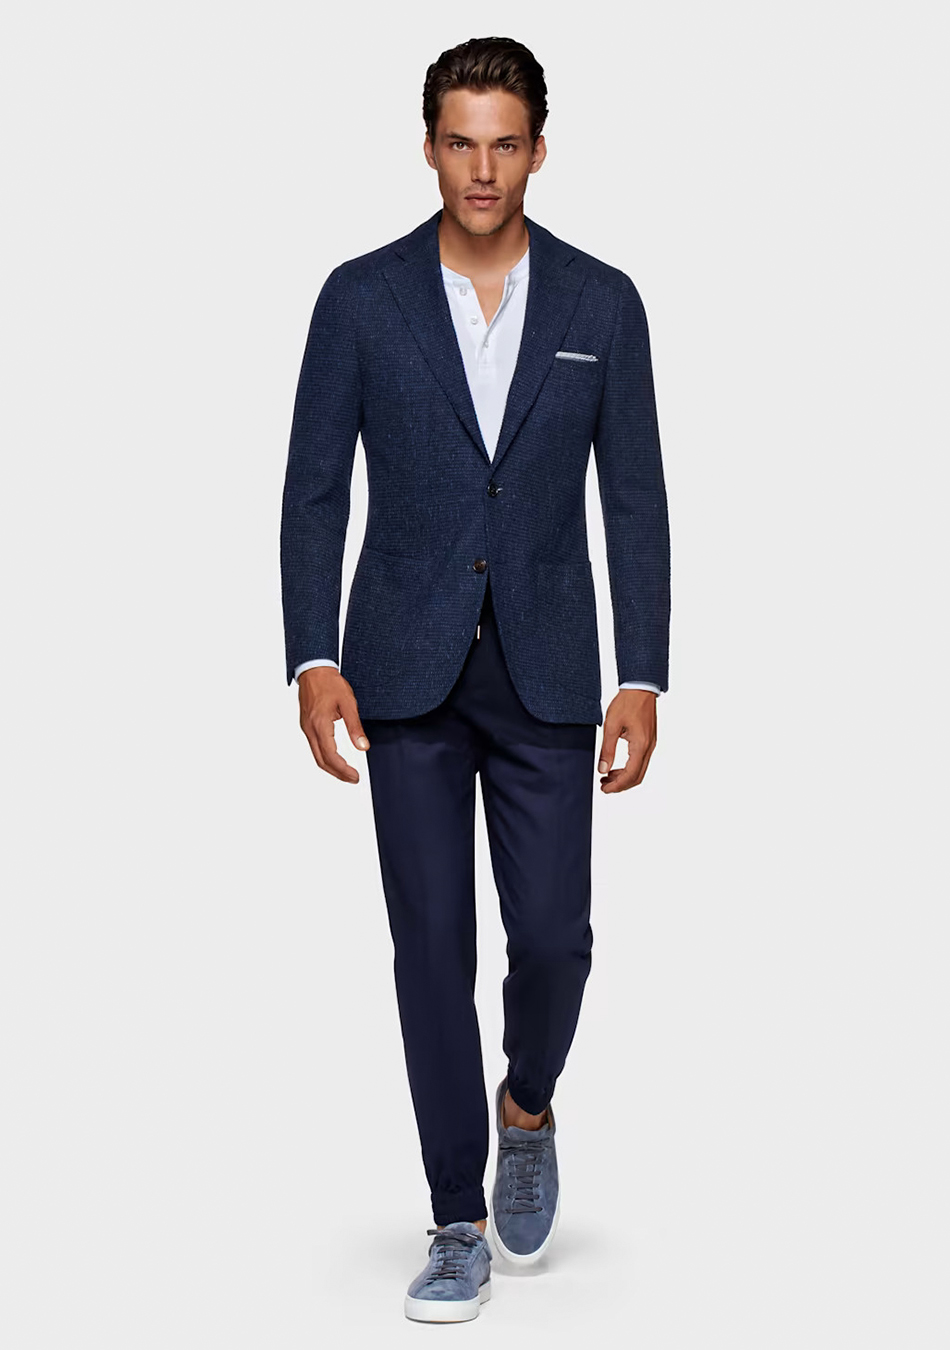 Navy blue suit, white Henley t-shirt, and blue sneakers